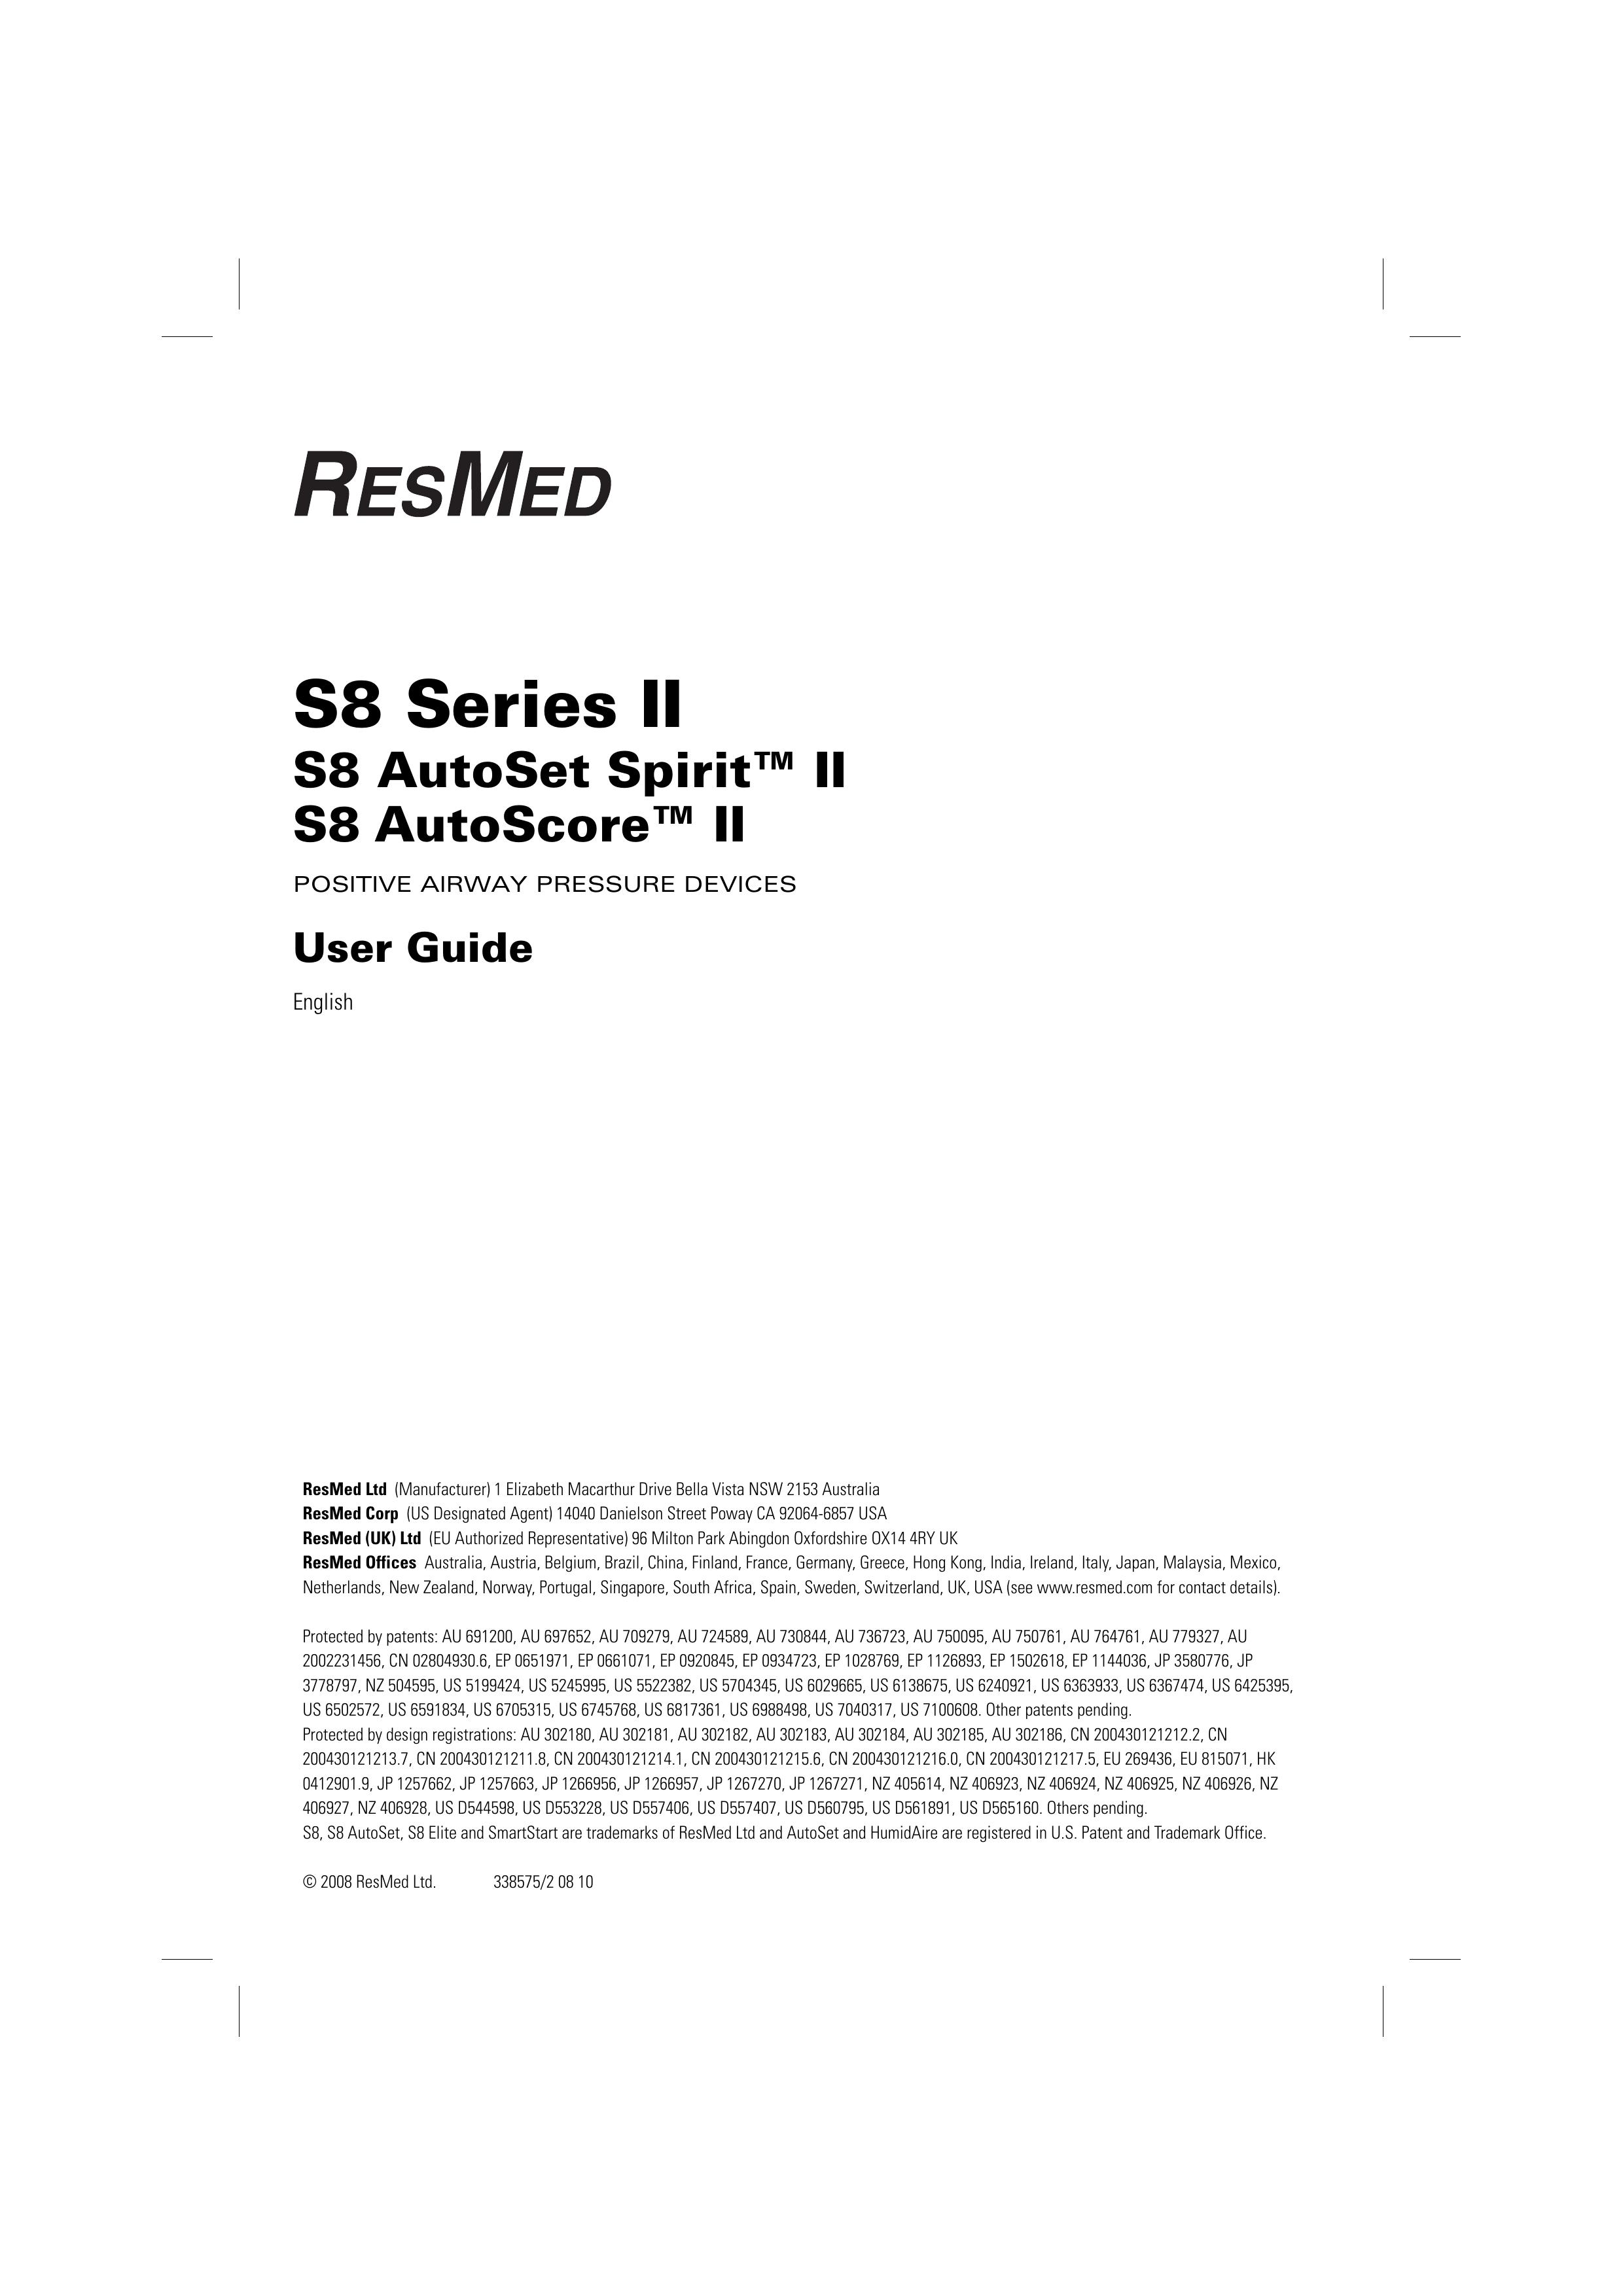 ResMed S8 AutoScore II Respiratory Product User Manual